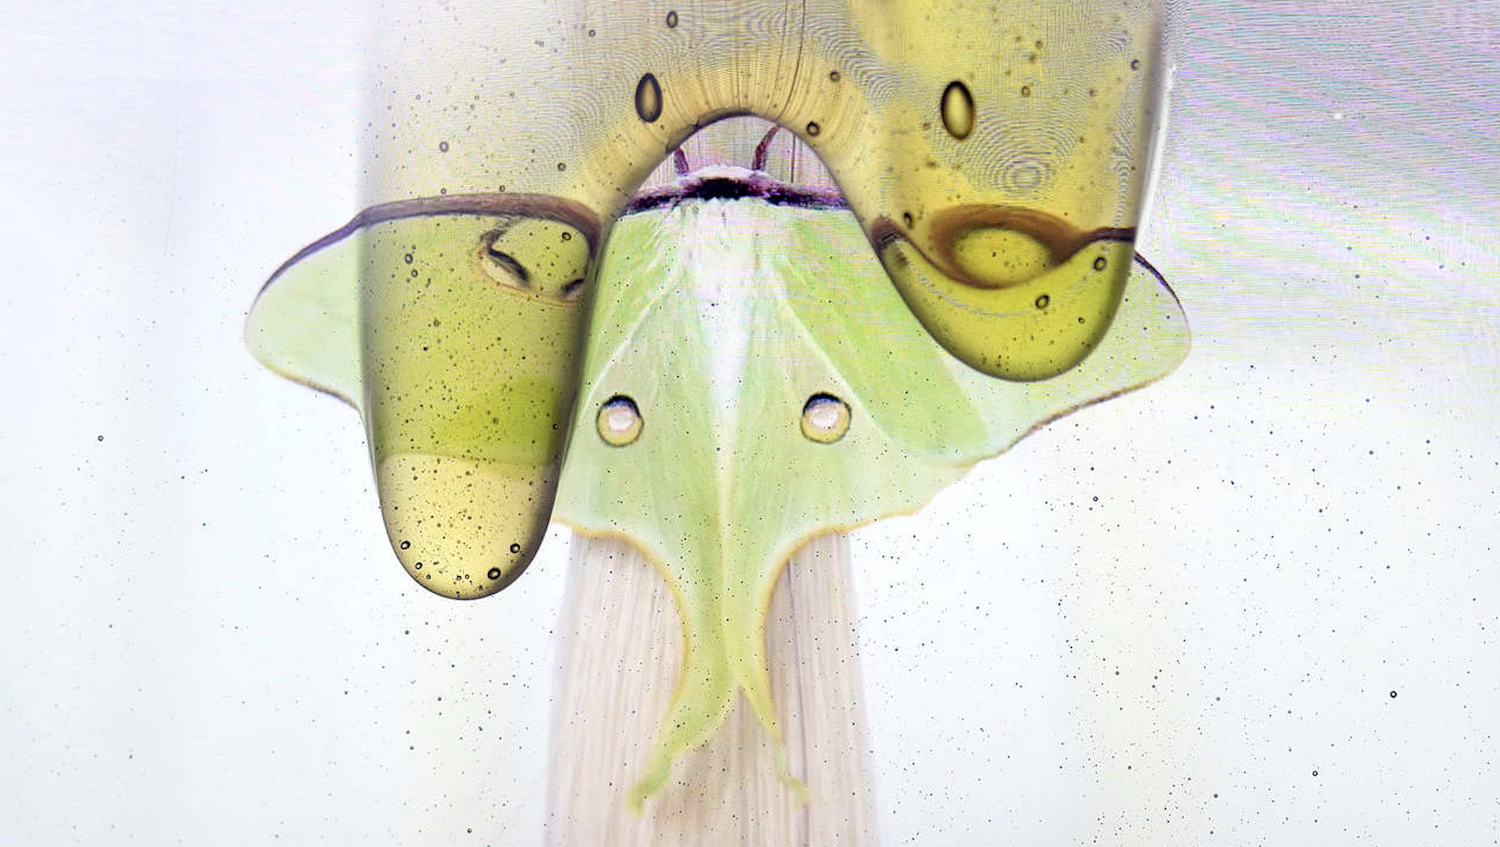 A lunar moth on a lock of blonde hair. Honey drips over the image